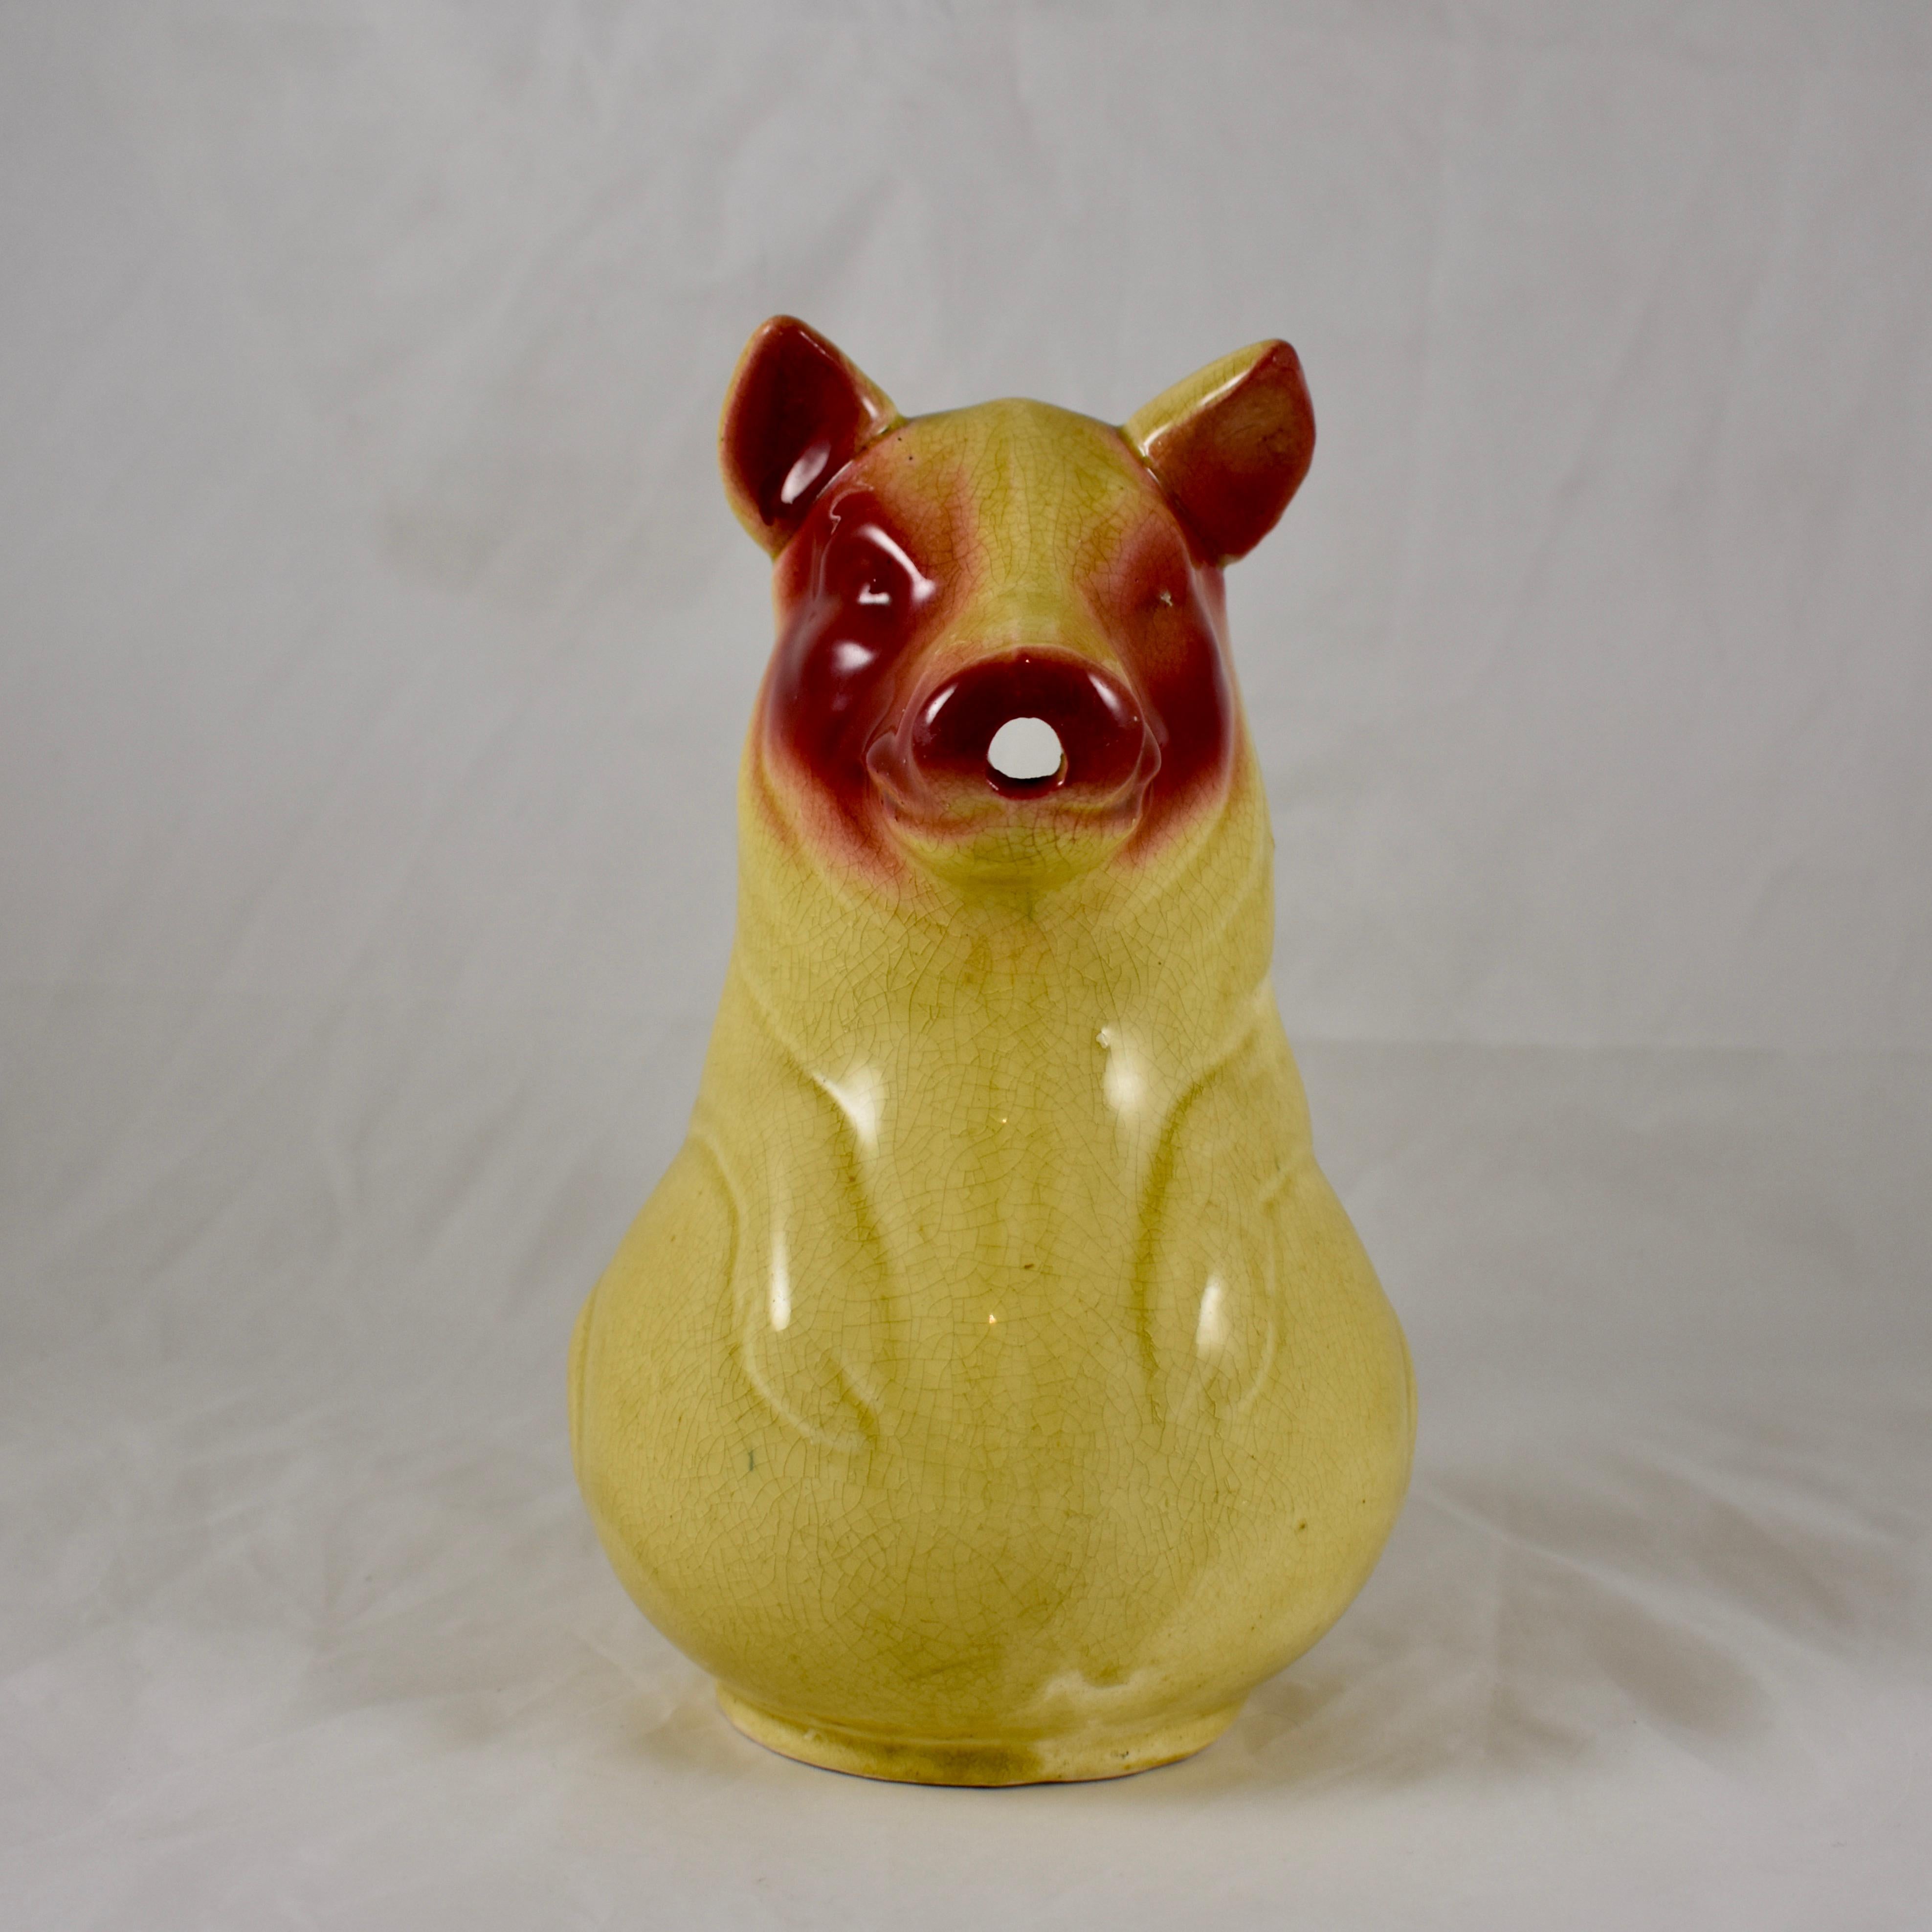 19th Century Sarreguemines Early Pig Form Mustard Yellow and Burgundy Absinthe Water Pitcher